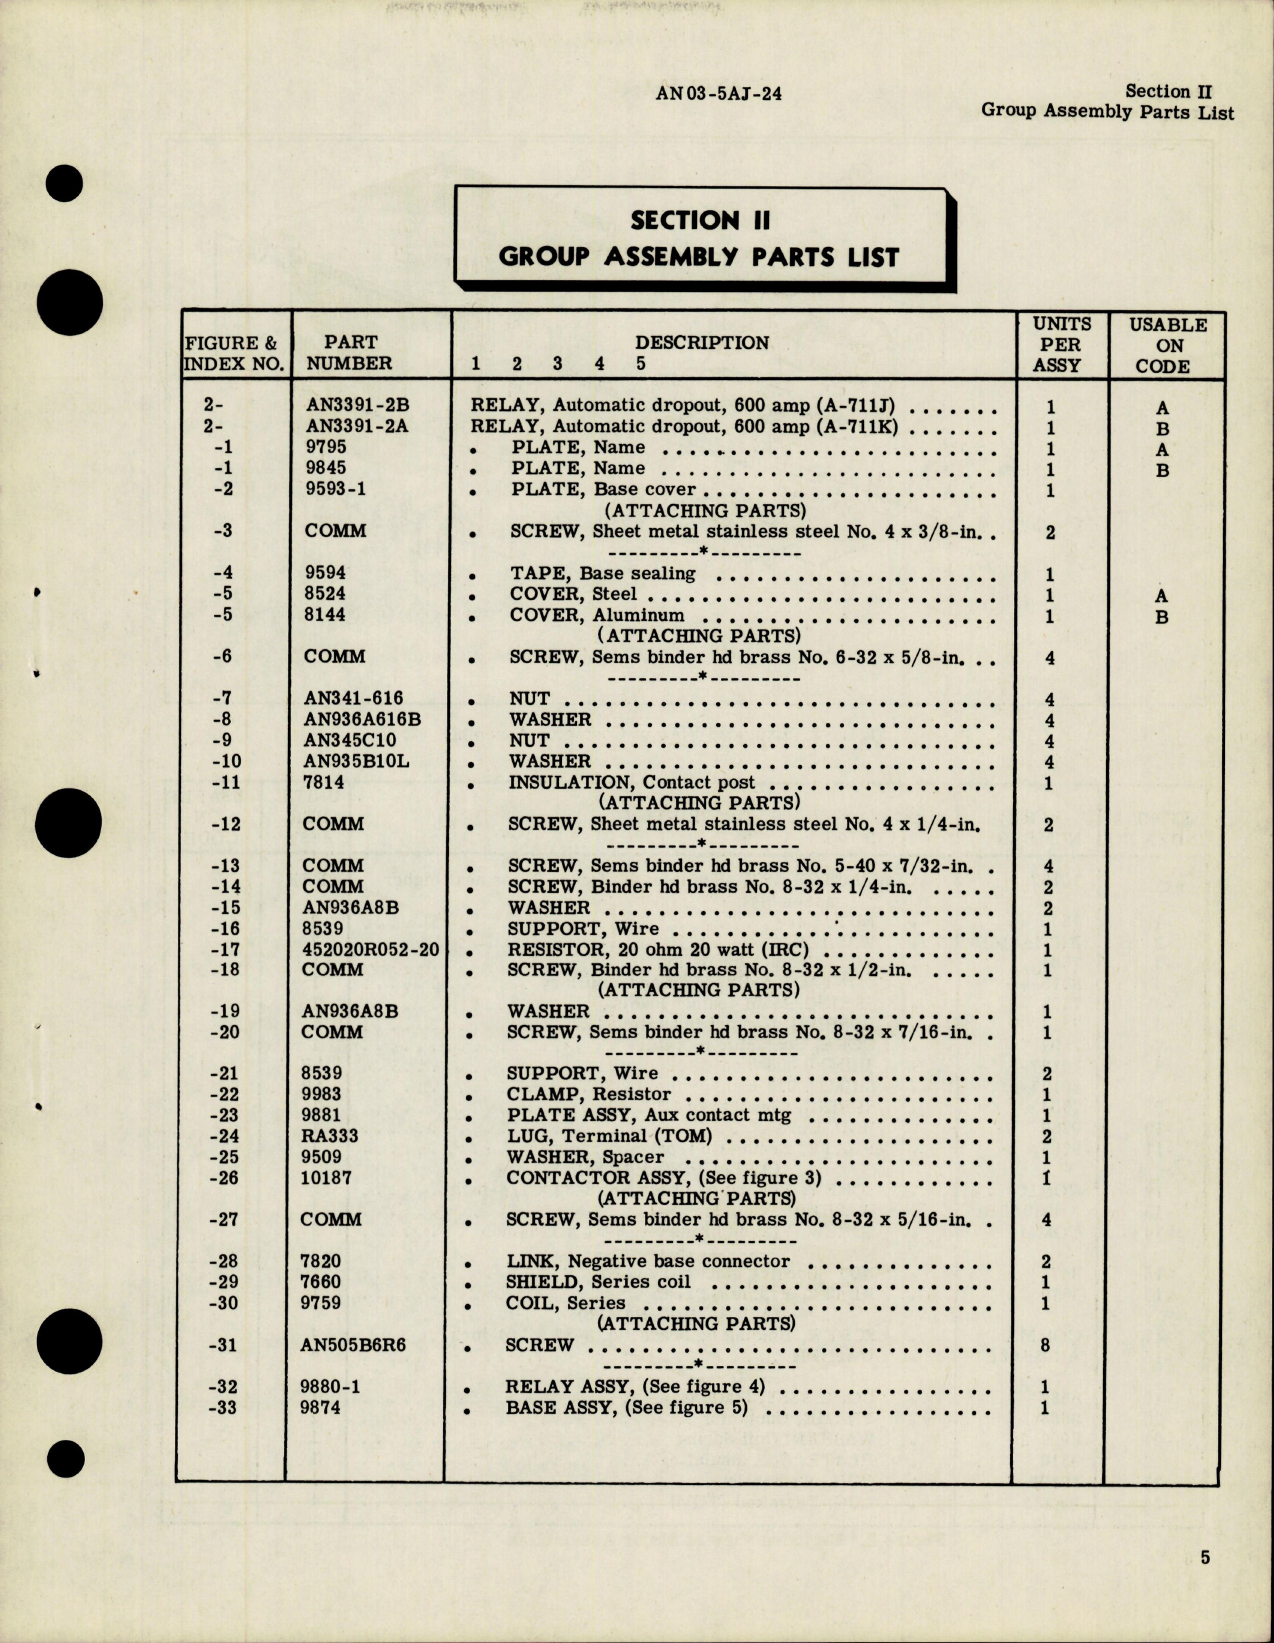 Sample page 7 from AirCorps Library document: Illustrated Parts Breakdown for Dropout Relay - Models A-711J and A-711K  - Type AN3391-2B and AN3391-2A